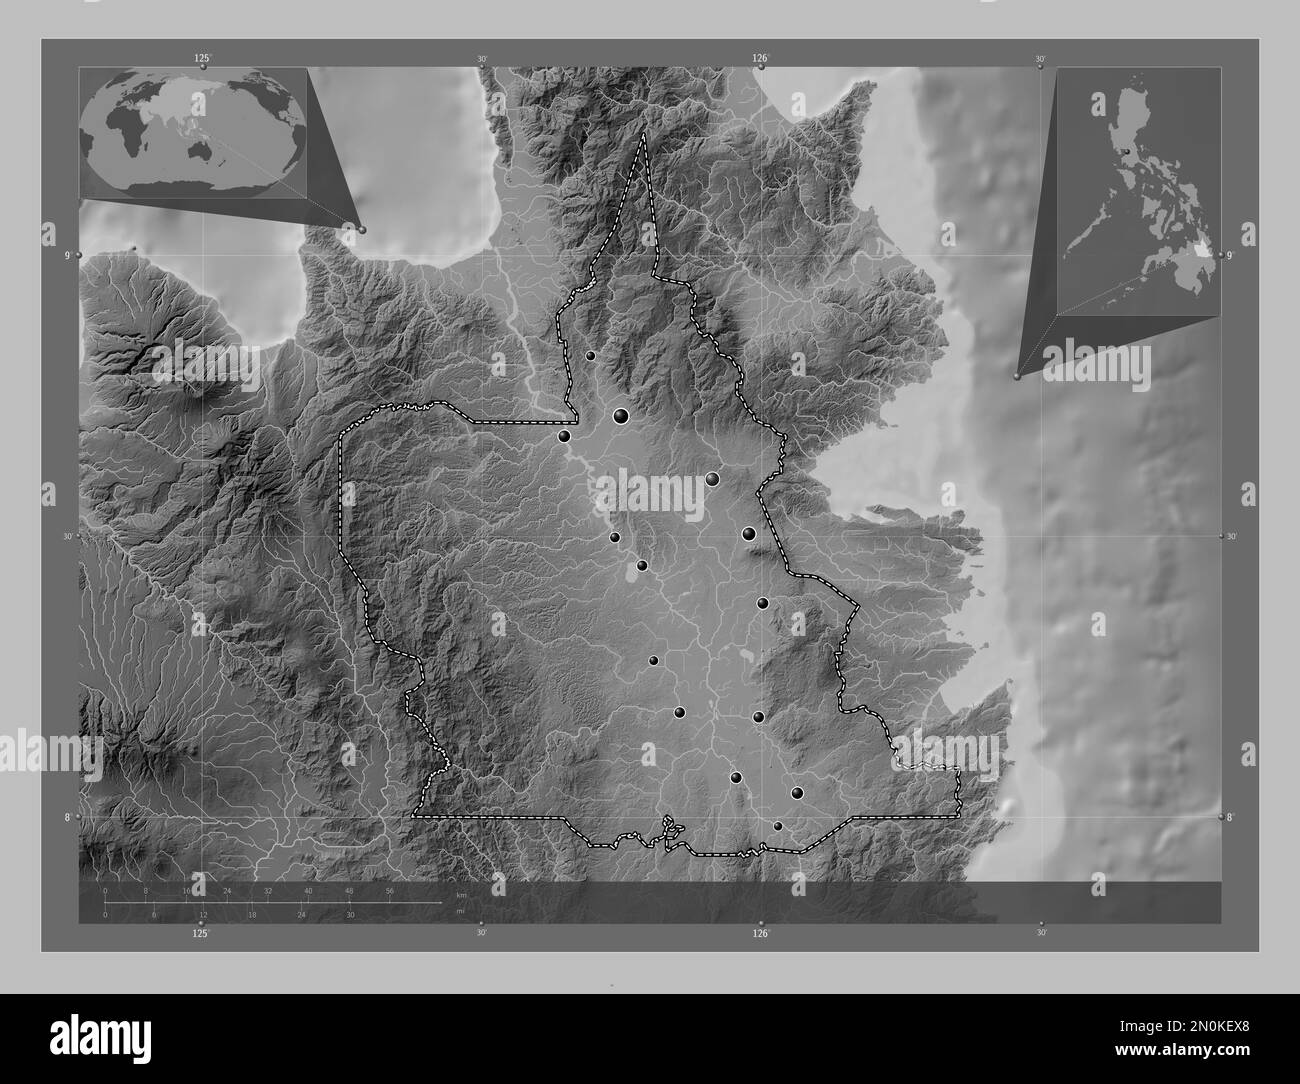 Agusan del Sur, province of Philippines. Grayscale elevation map with lakes and rivers. Locations of major cities of the region. Corner auxiliary loca Stock Photo